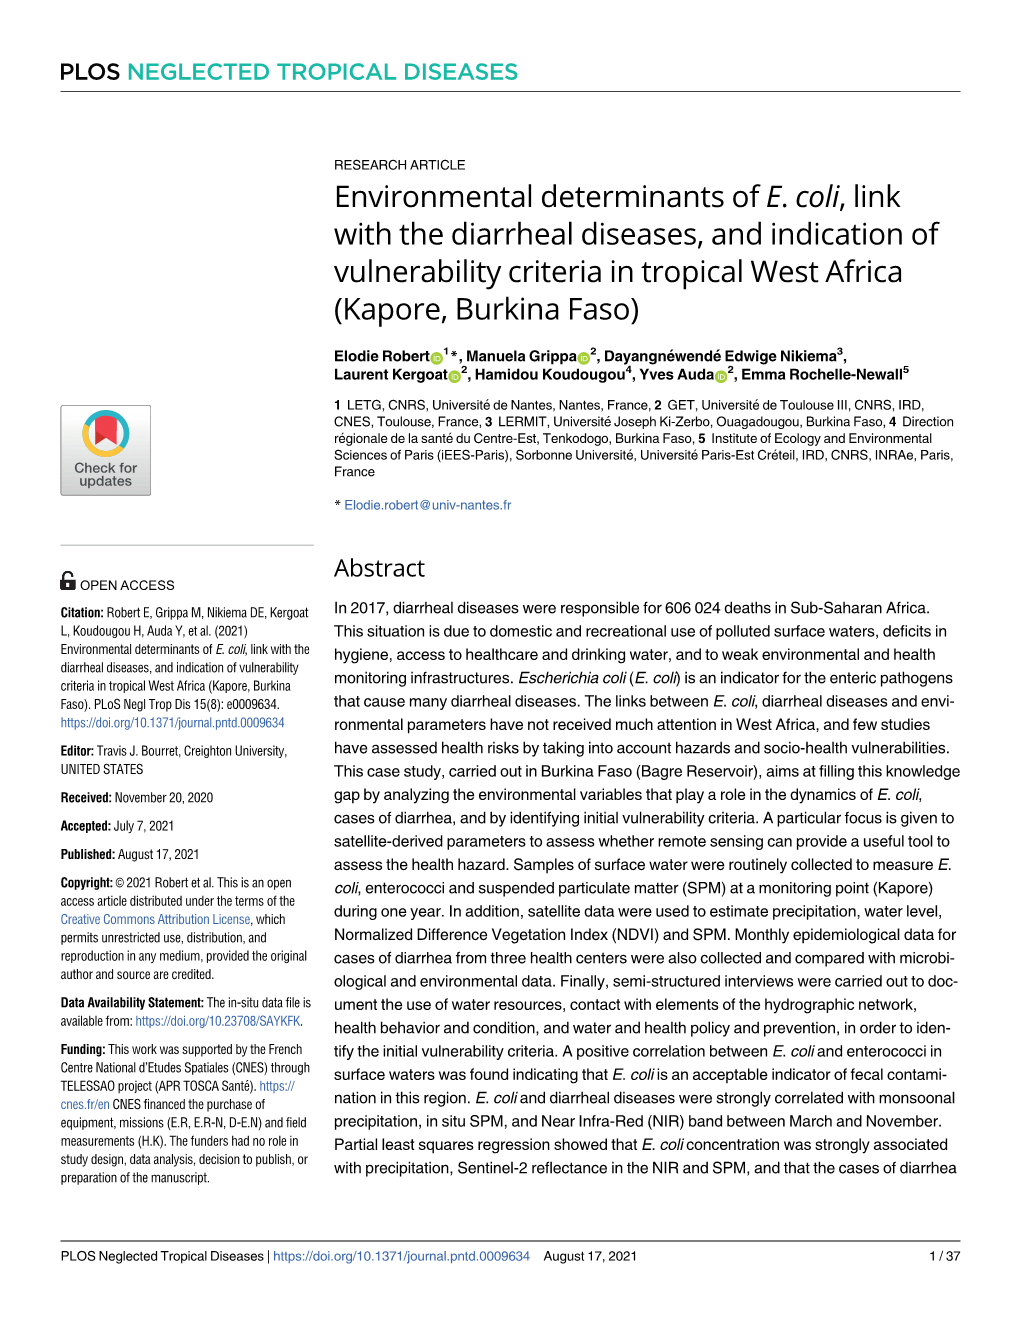 Environmental Determinants of E. Coli, Link with the Diarrheal Diseases, and Indication of Vulnerability Criteria in Tropical West Africa (Kapore, Burkina Faso)